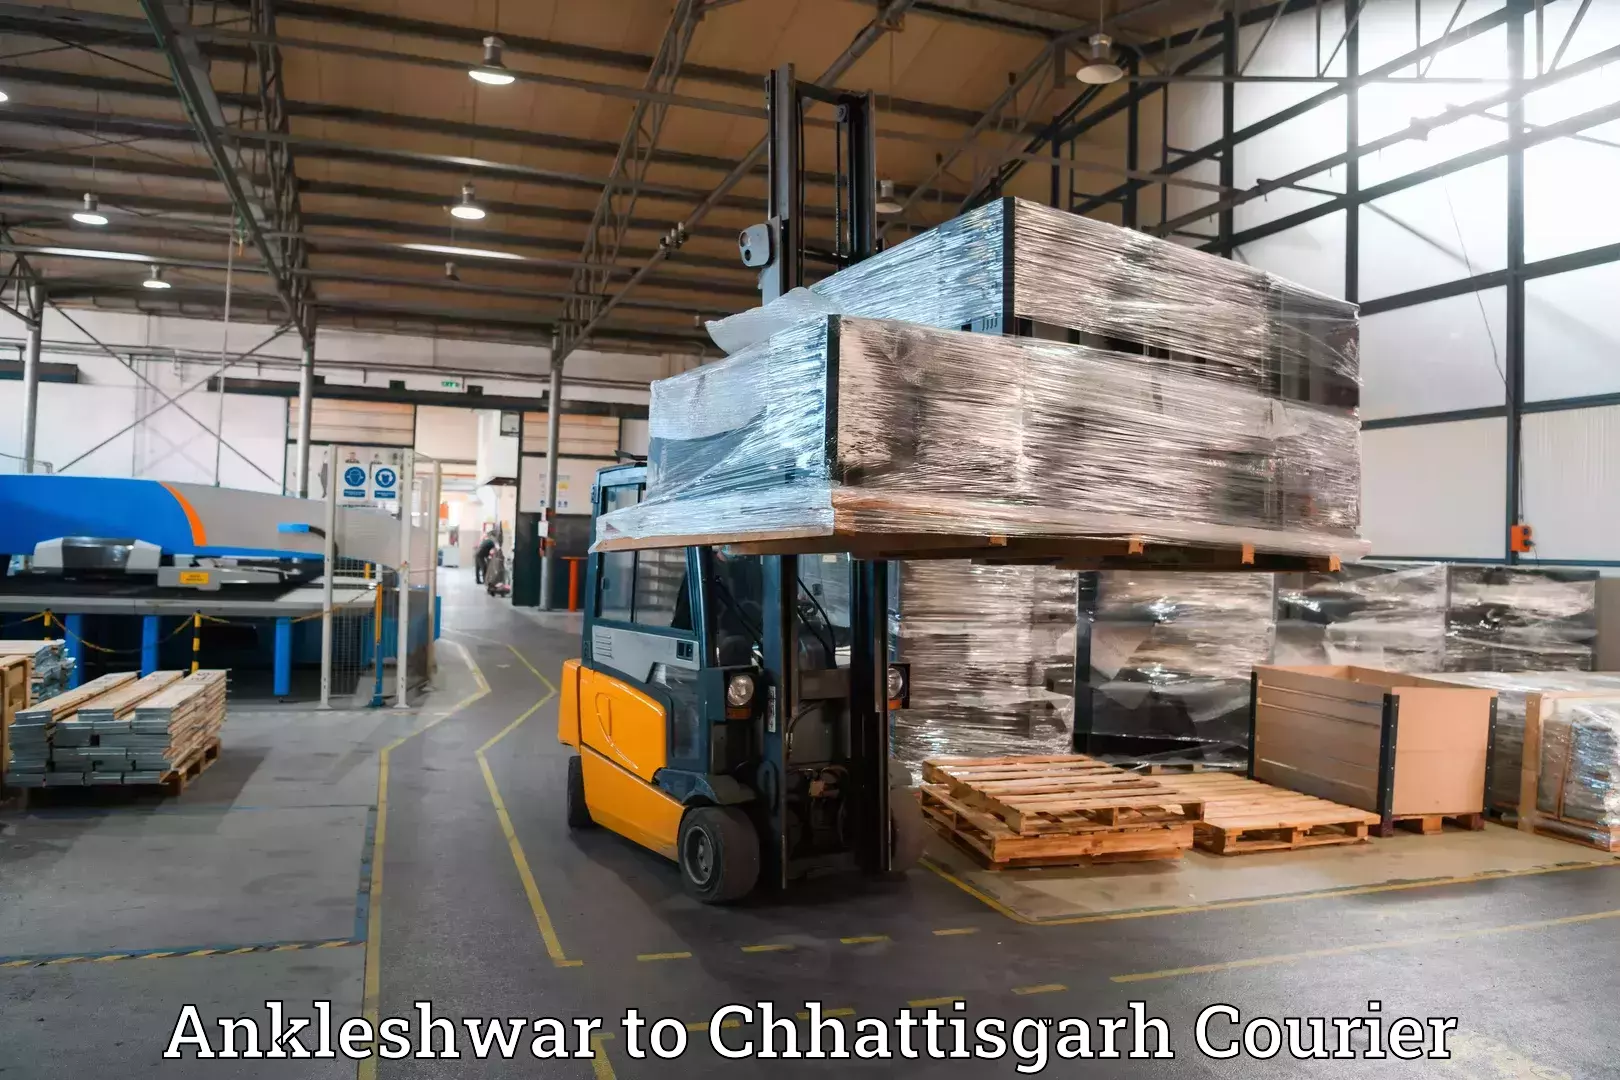 Baggage transport cost in Ankleshwar to Khairagarh